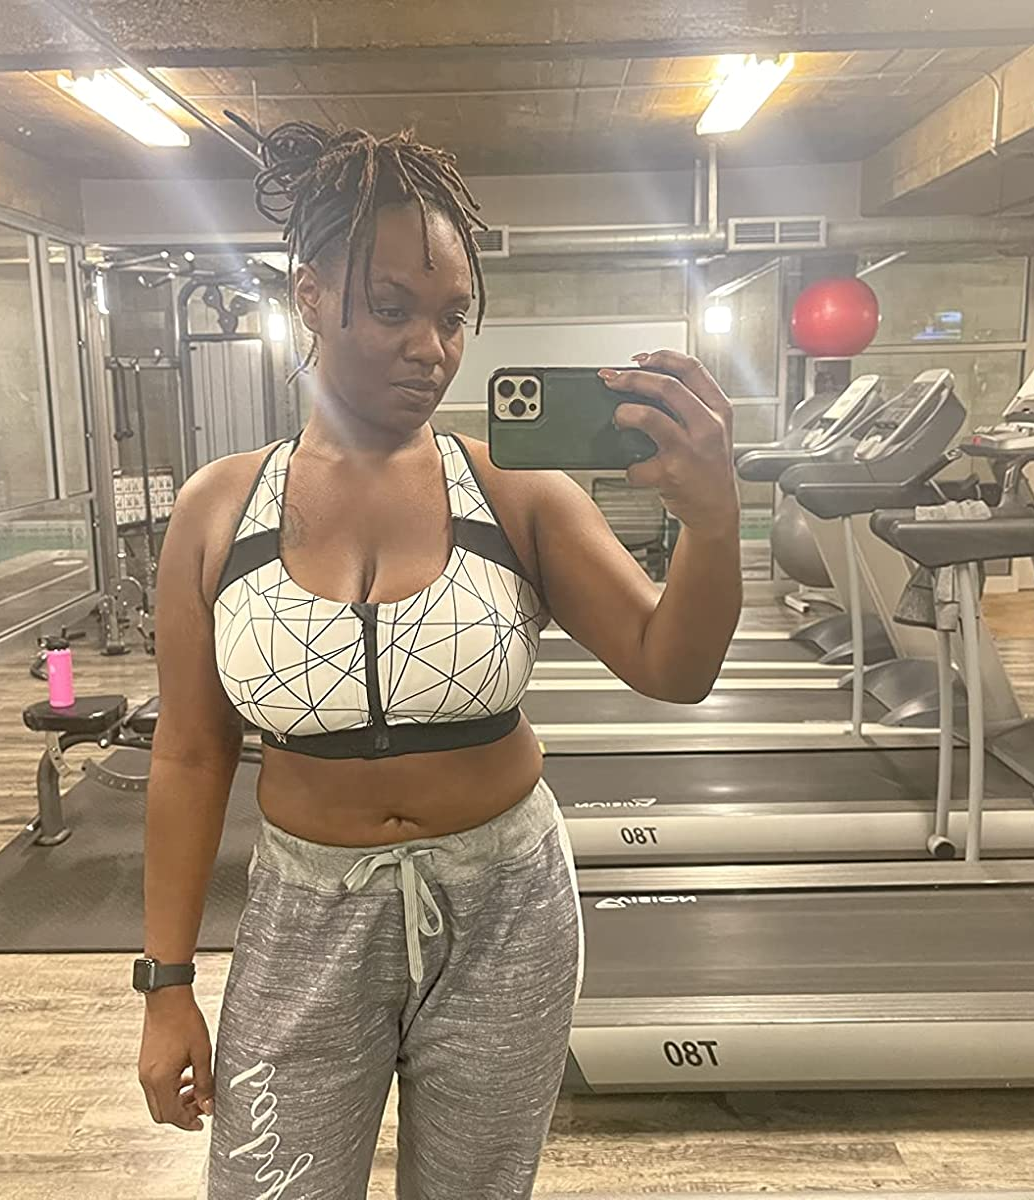 Fitness blogger defends sports bras as acceptable gym attire